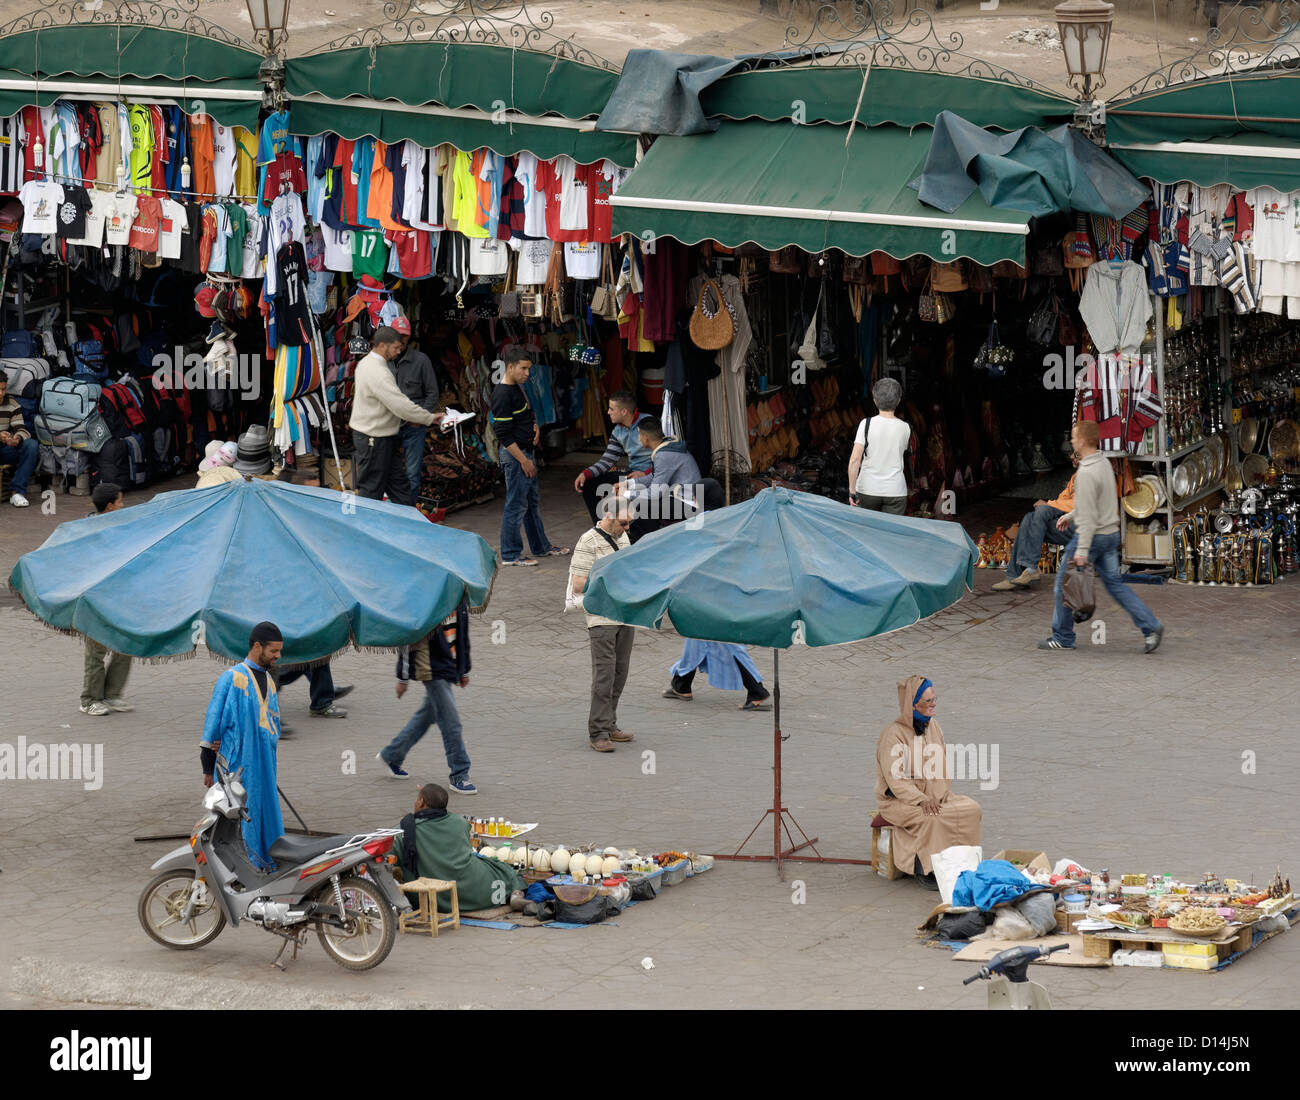 Crowds, food stalls and shops in Djemaa El Fna square, Marrakech, Morocco. Stock Photo